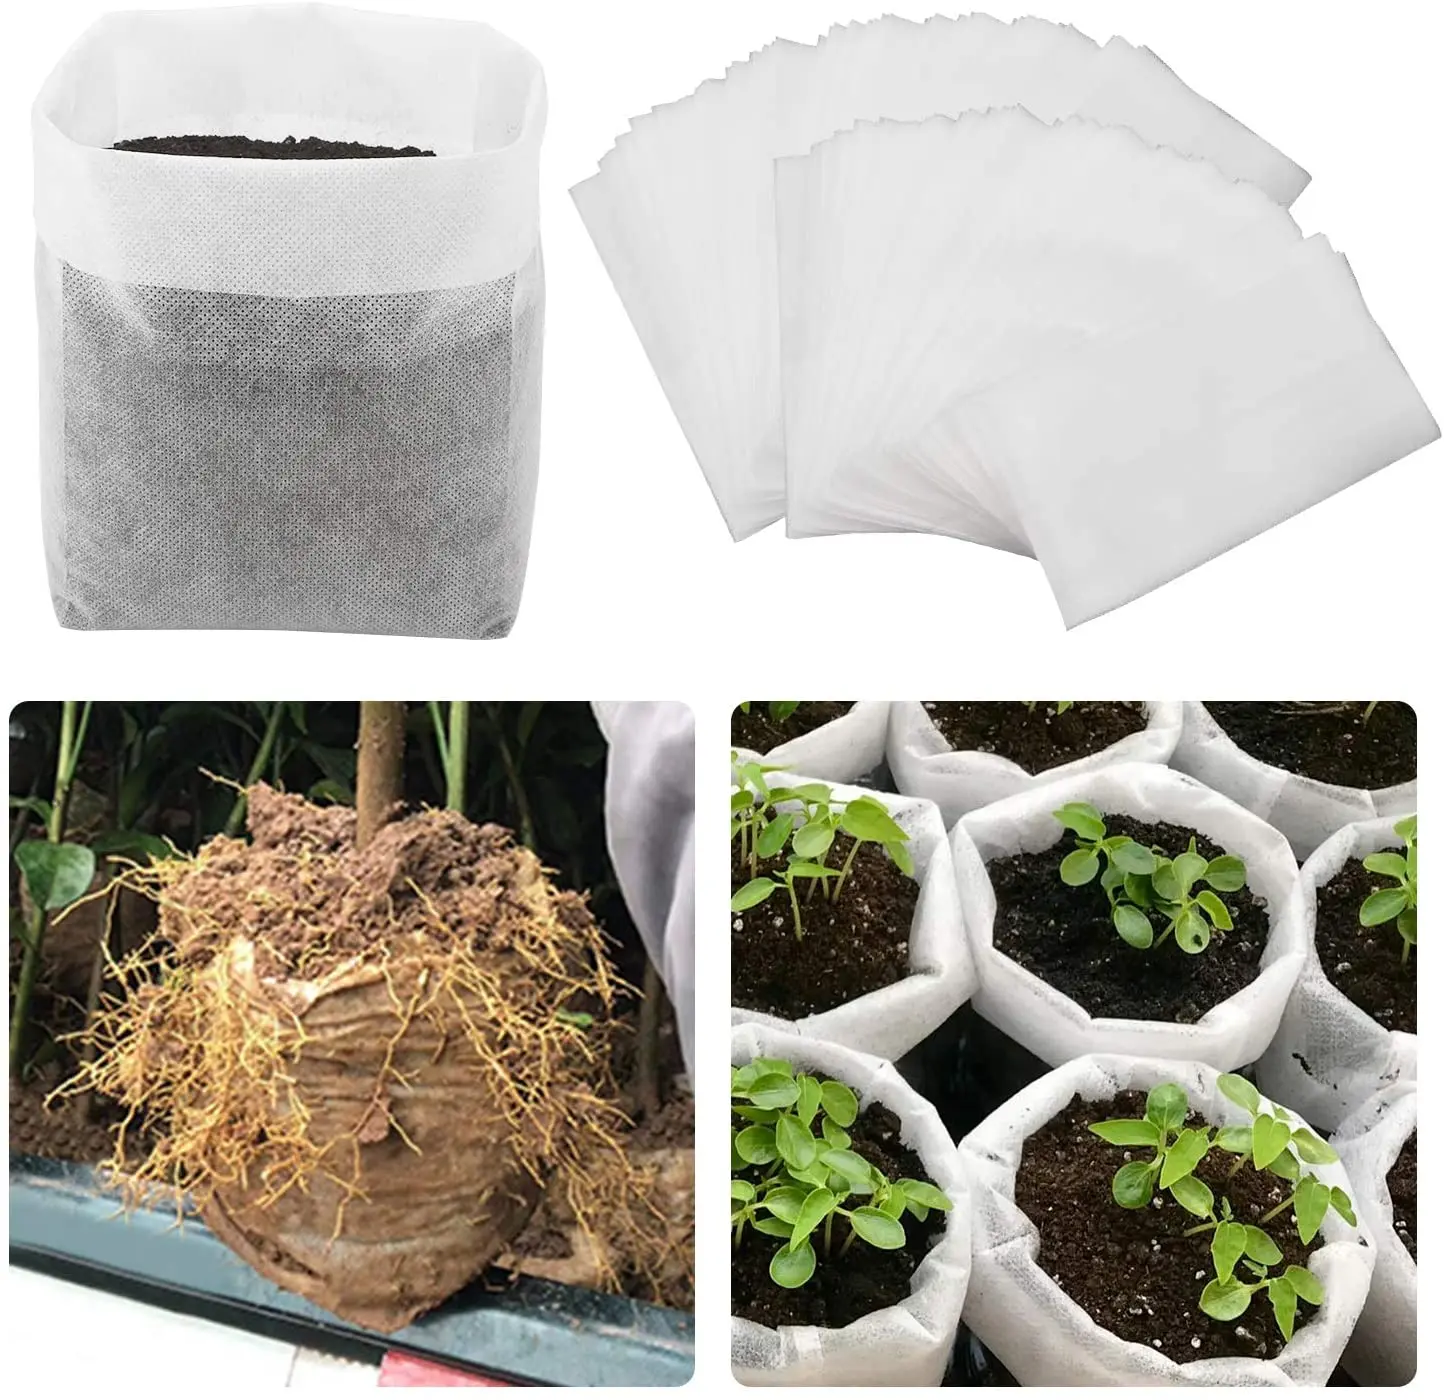 Large Plant Grow Bags, Degradable Non-Woven Plant Seedling Bags Fabric Pots for Seedling